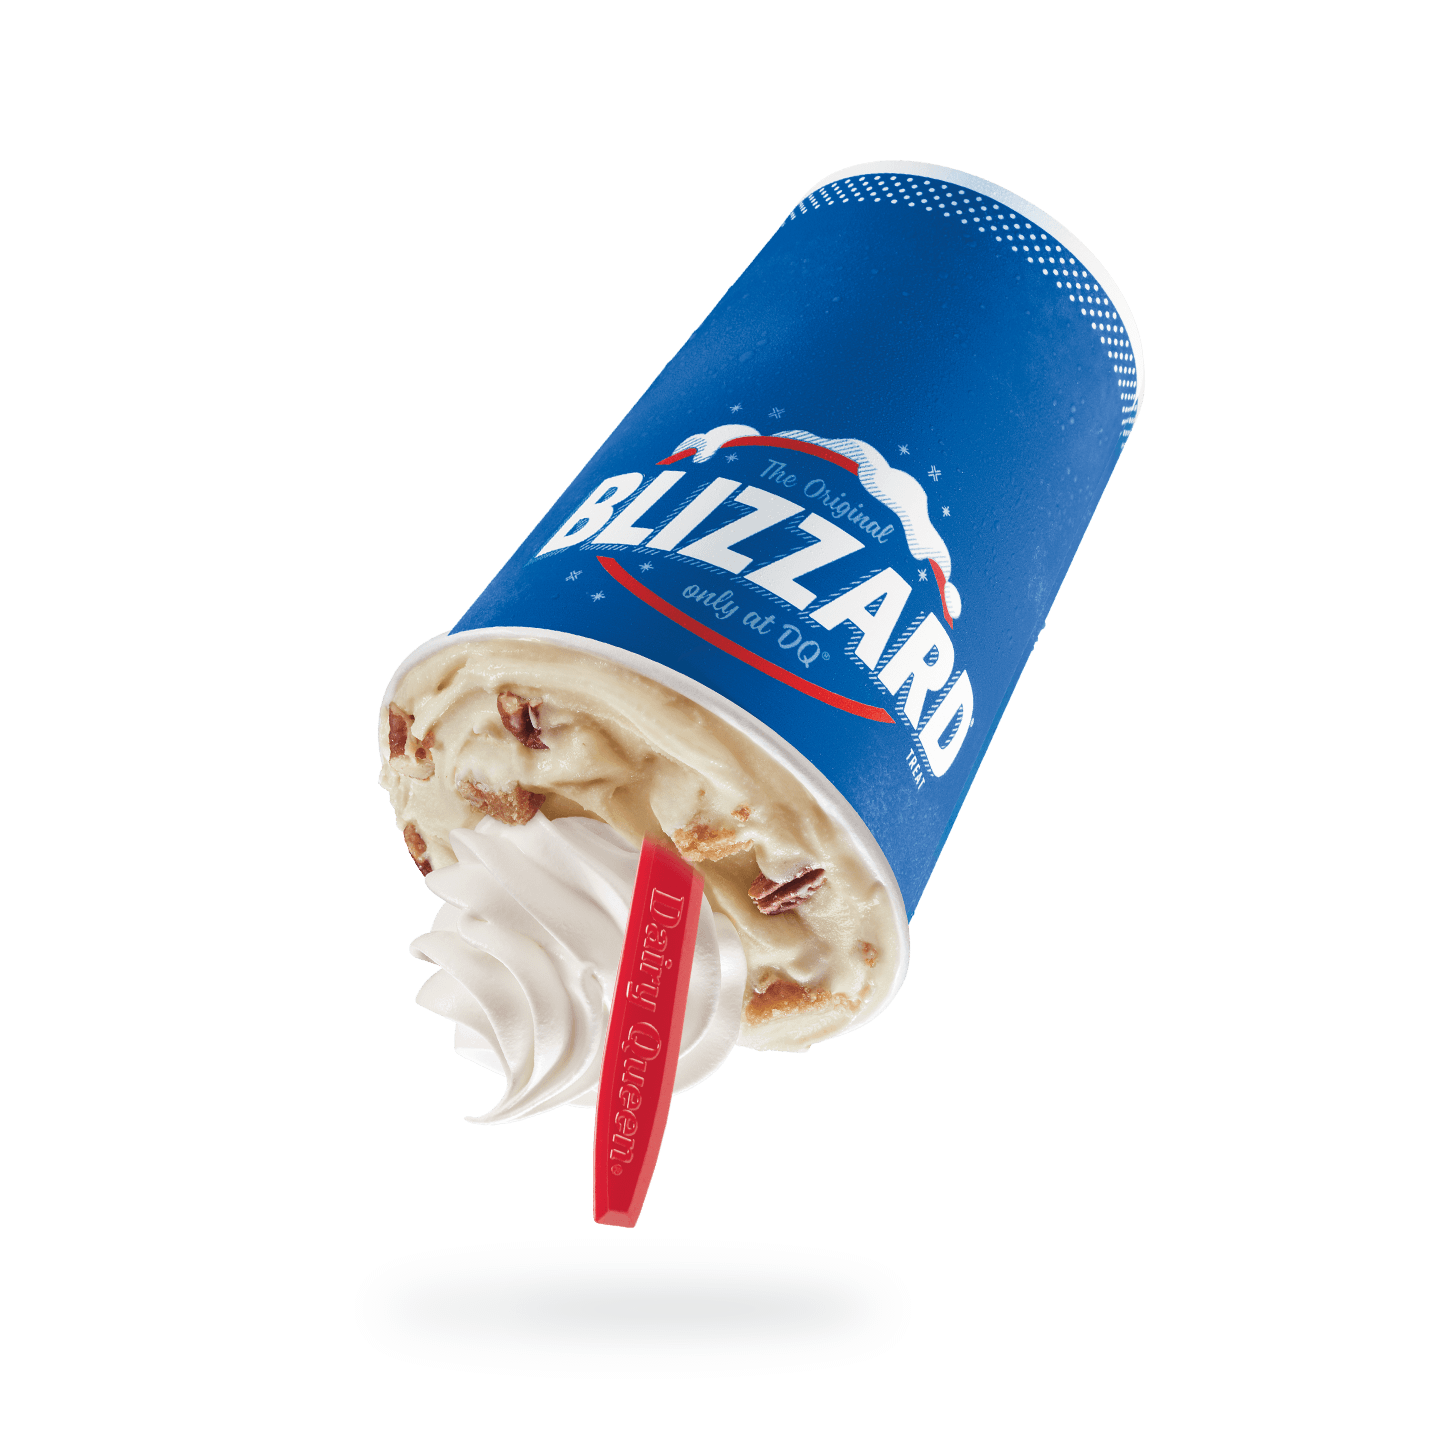 Dairy Queen Small Pecan Pie Blizzard Nutrition Facts